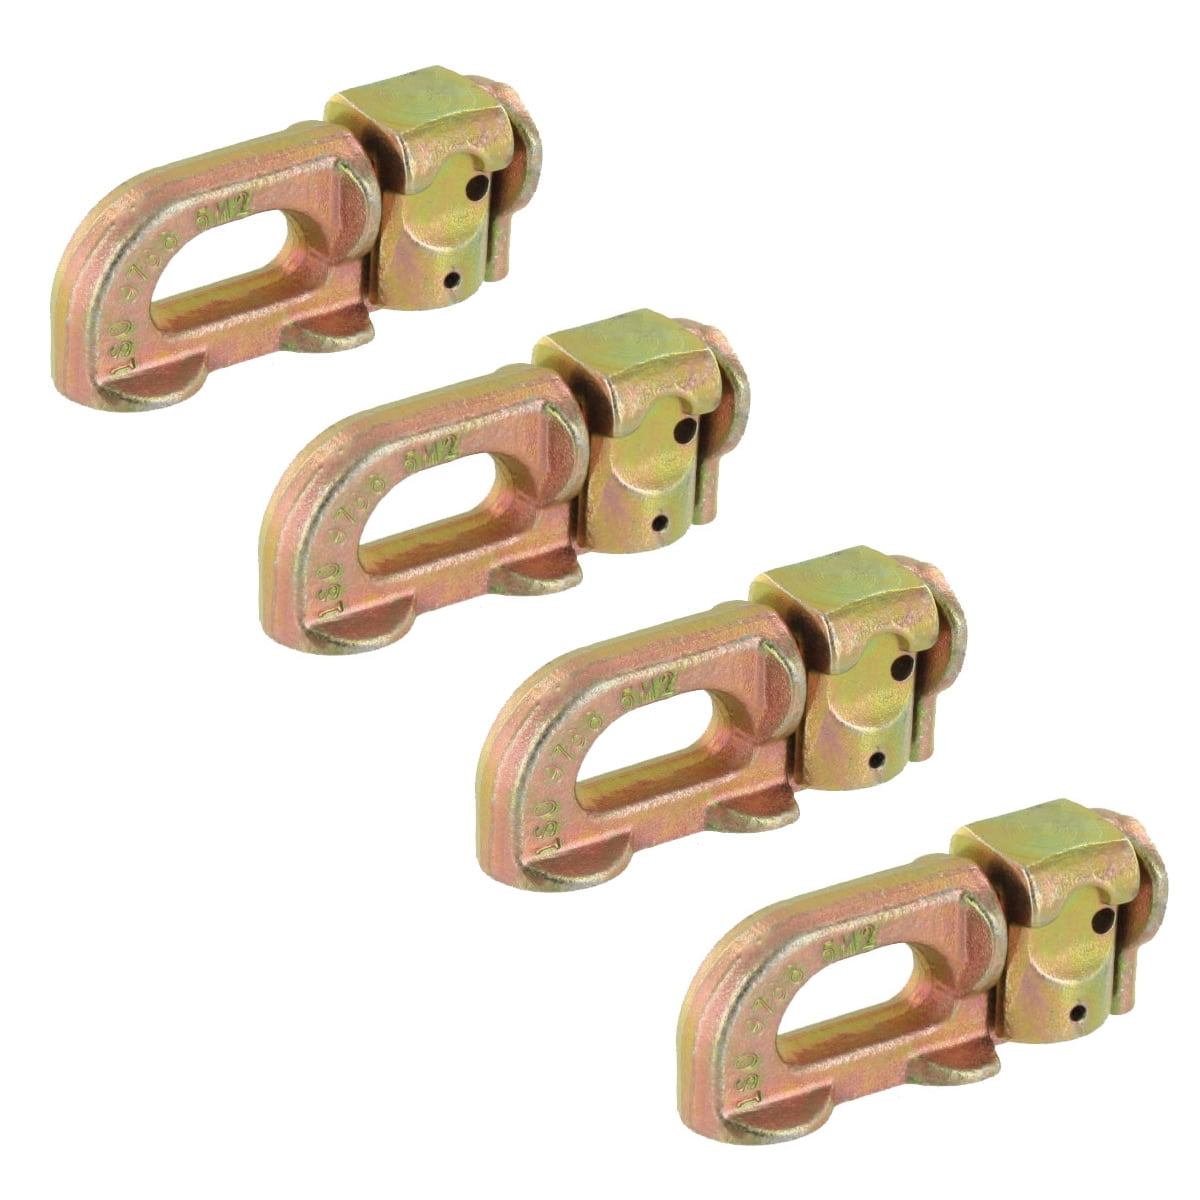 L Track Stud,Double Stud Fitting with Round Ring 10 Packs B/S 5000 lbs 